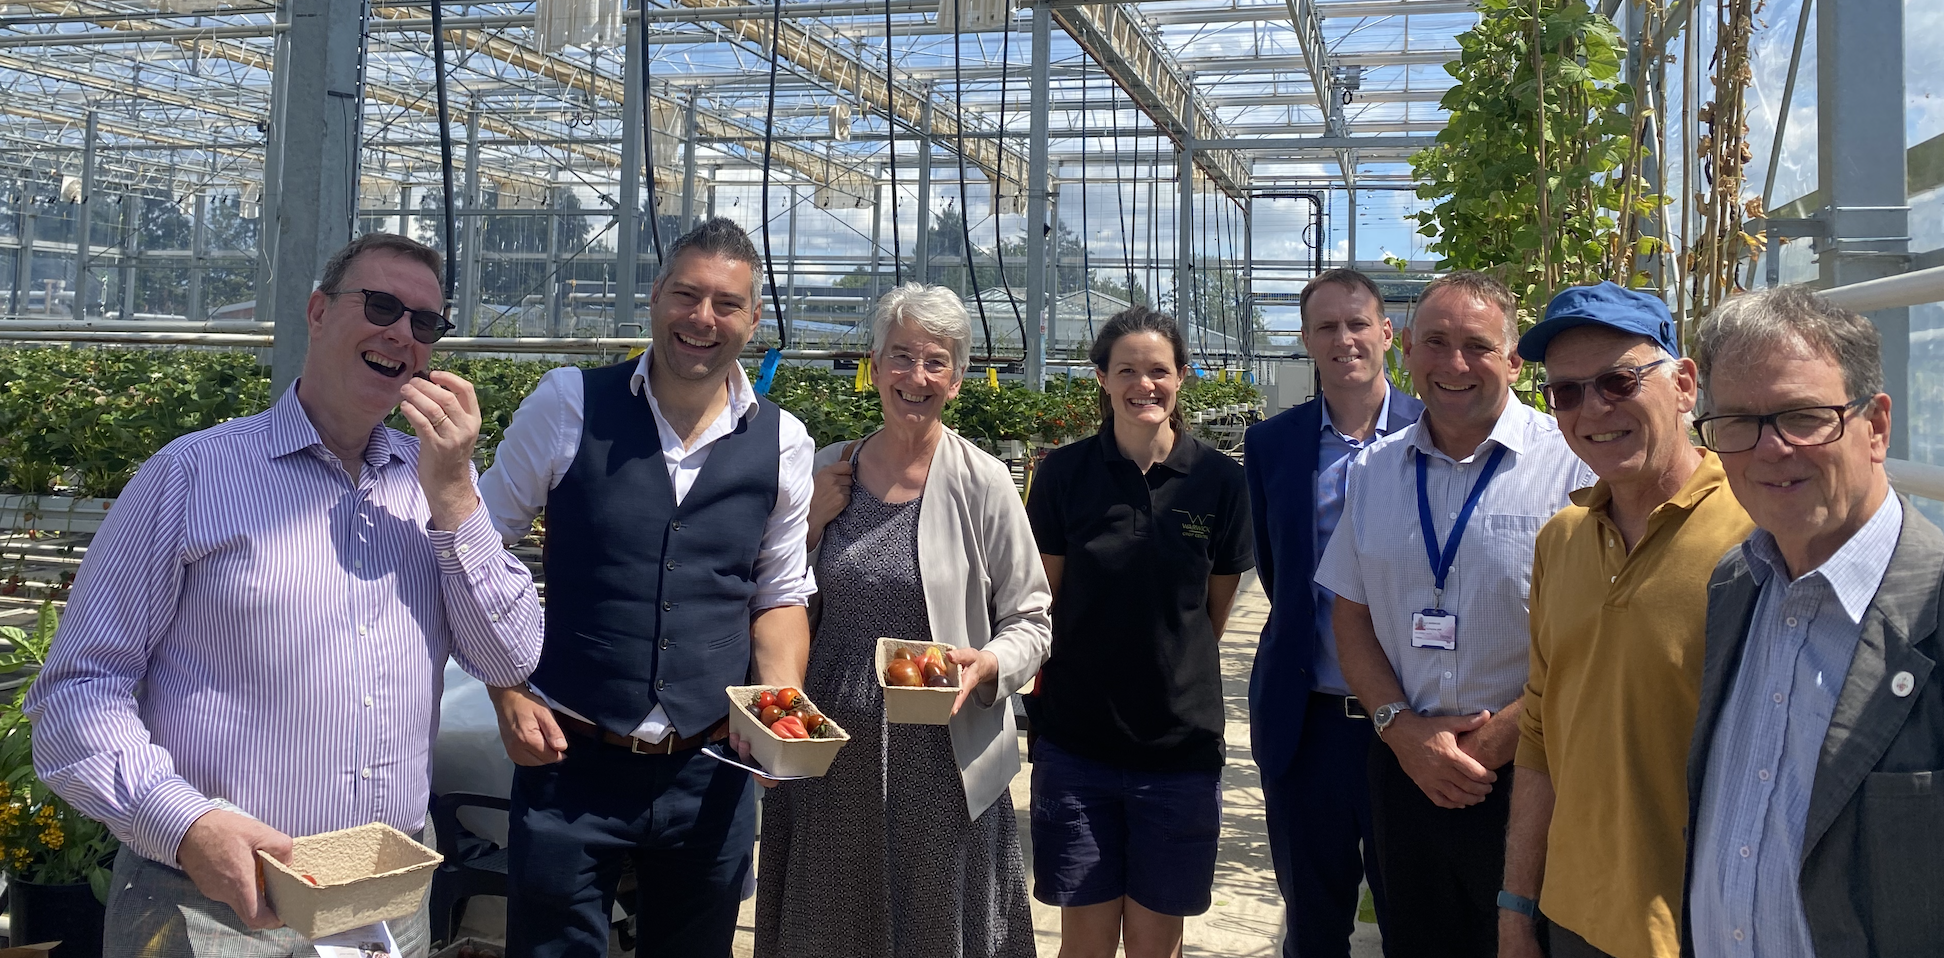 Visit to Warwick Crop Centre at the University of Warwick Innovation Campus, Stratford-Upon-Avon by Stratford-on-Avon District Council Leadership. Pictured in the Natural Light Growing Centre.